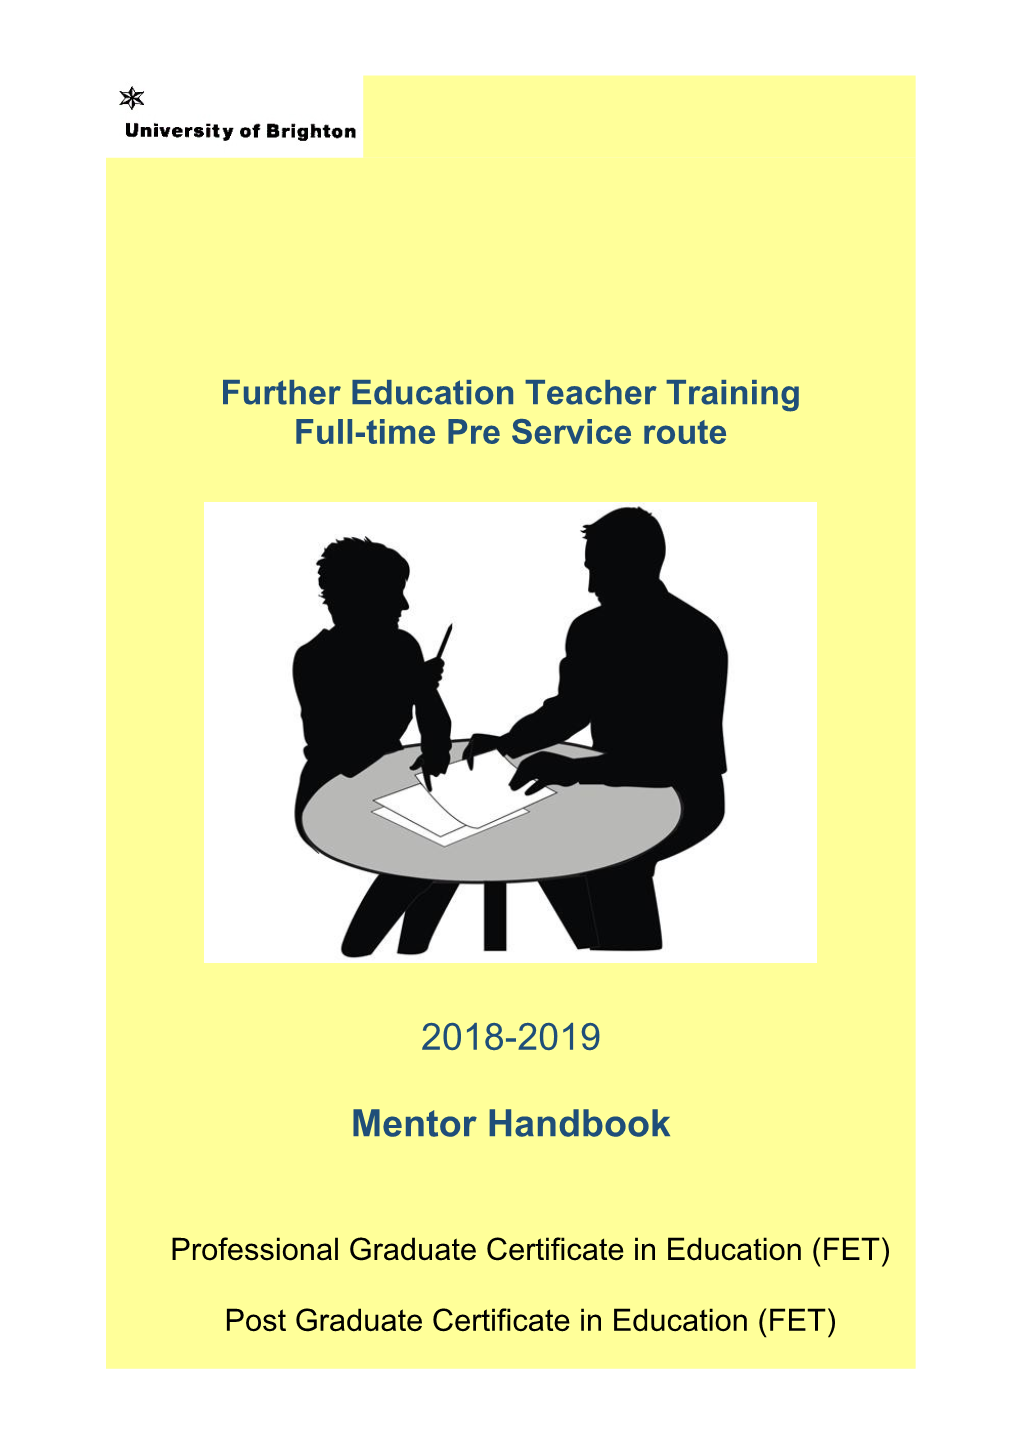 Further Education Teacher Training Full-Time Pre Service Route